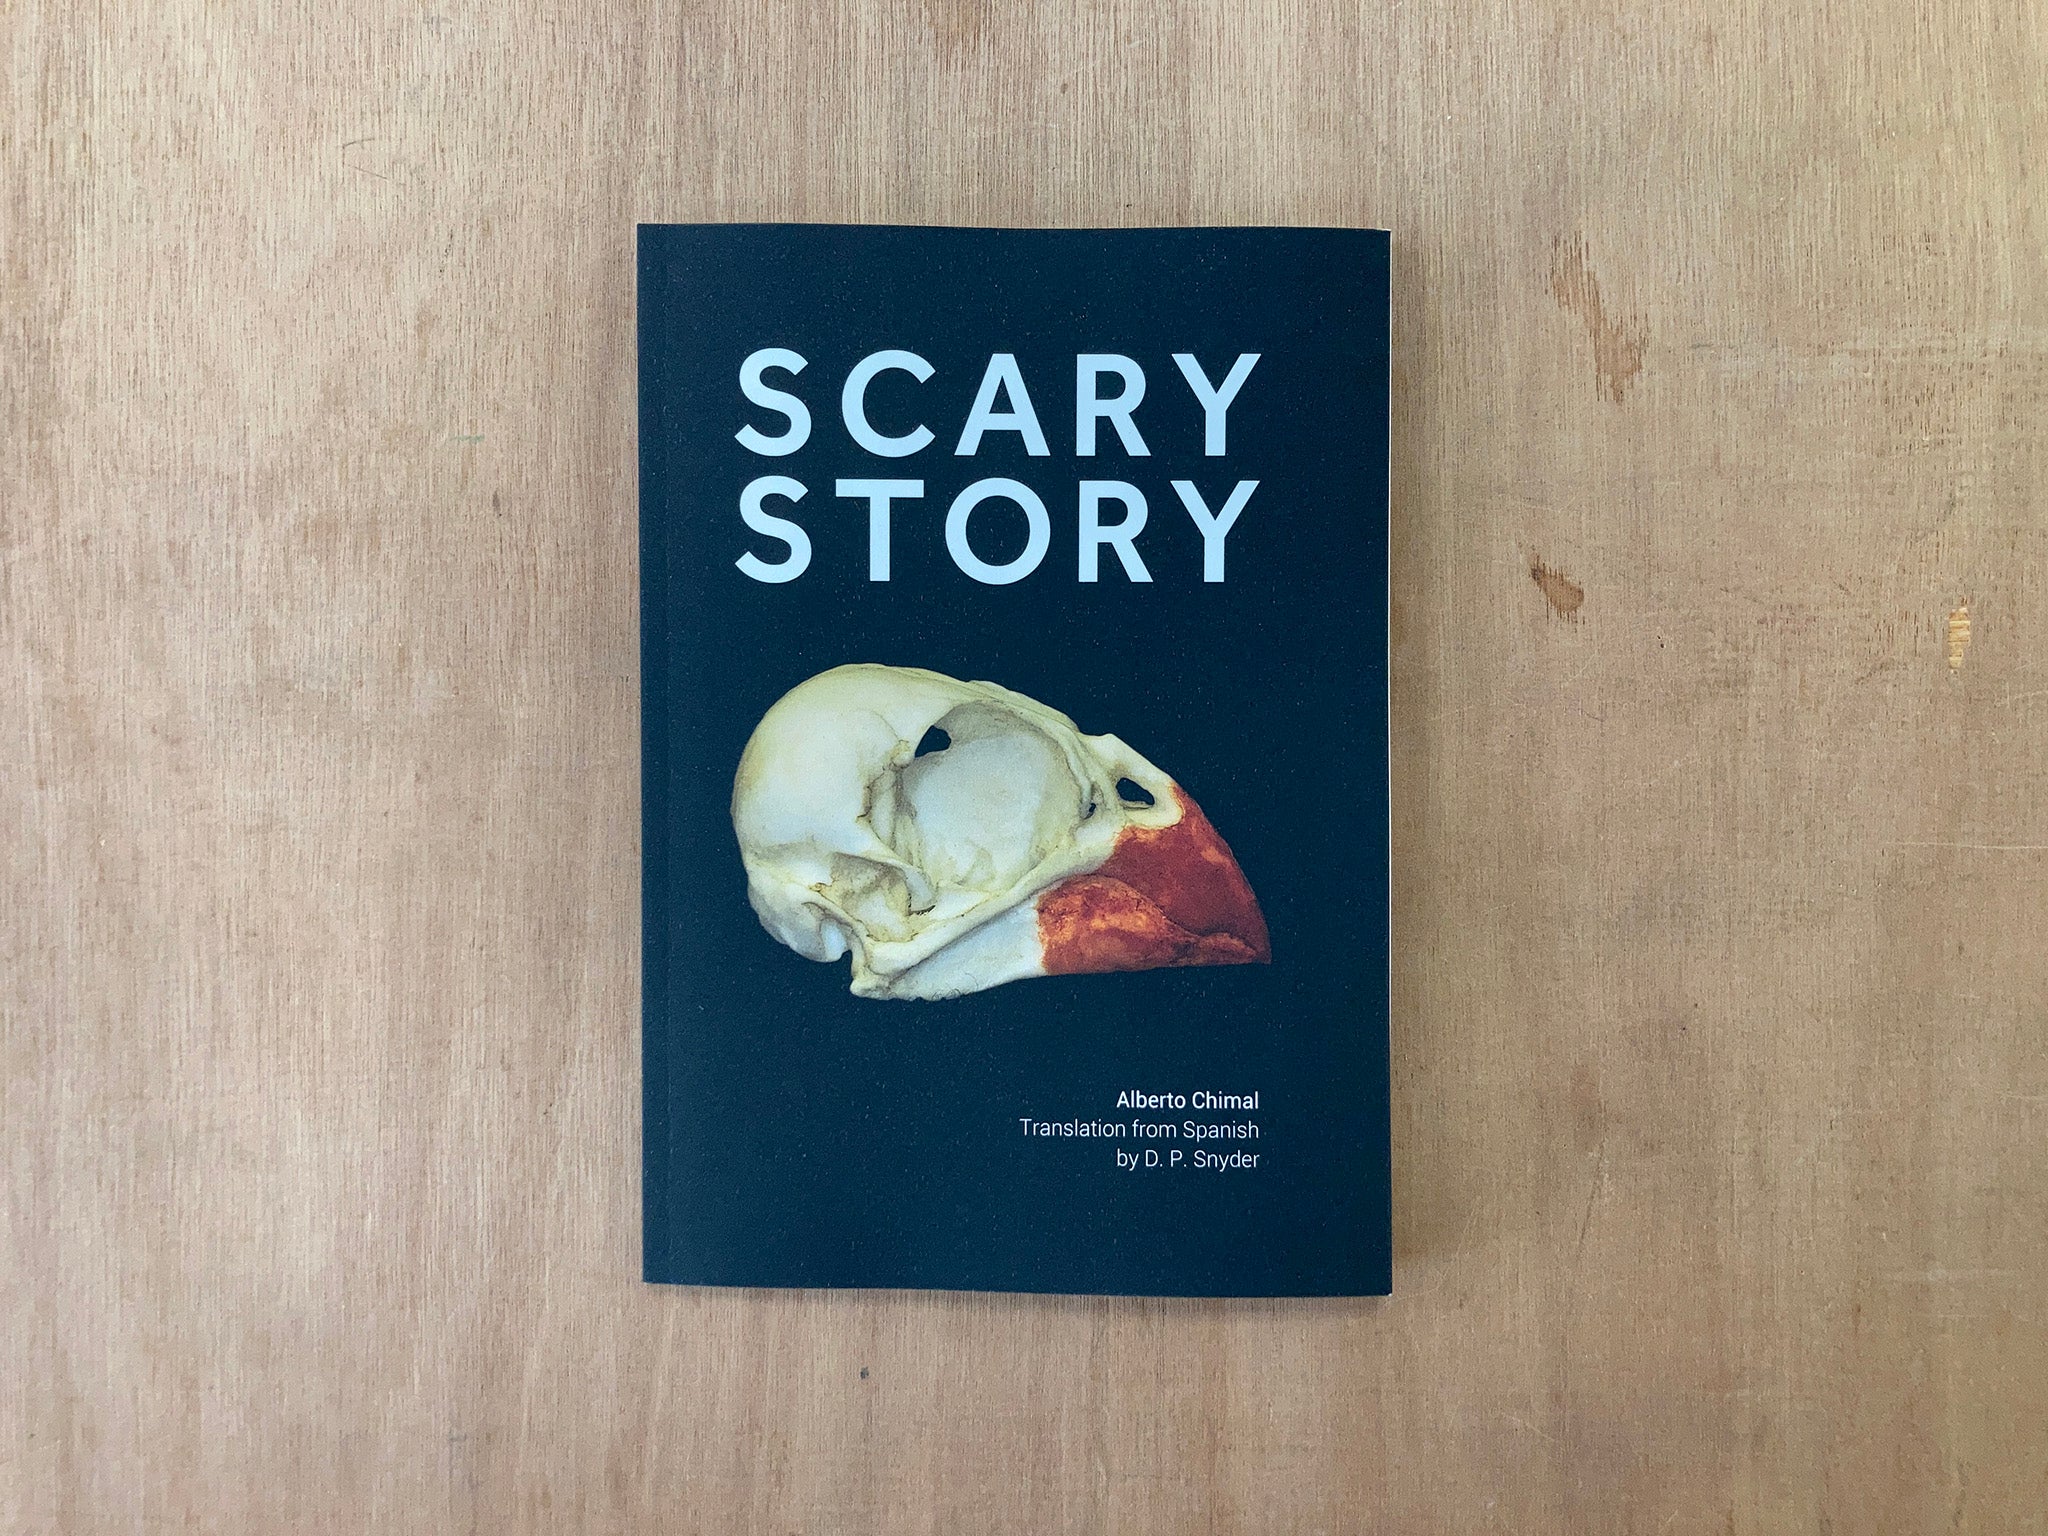 SCARY STORY by Alberto Chimal translated by D.P. Snyder